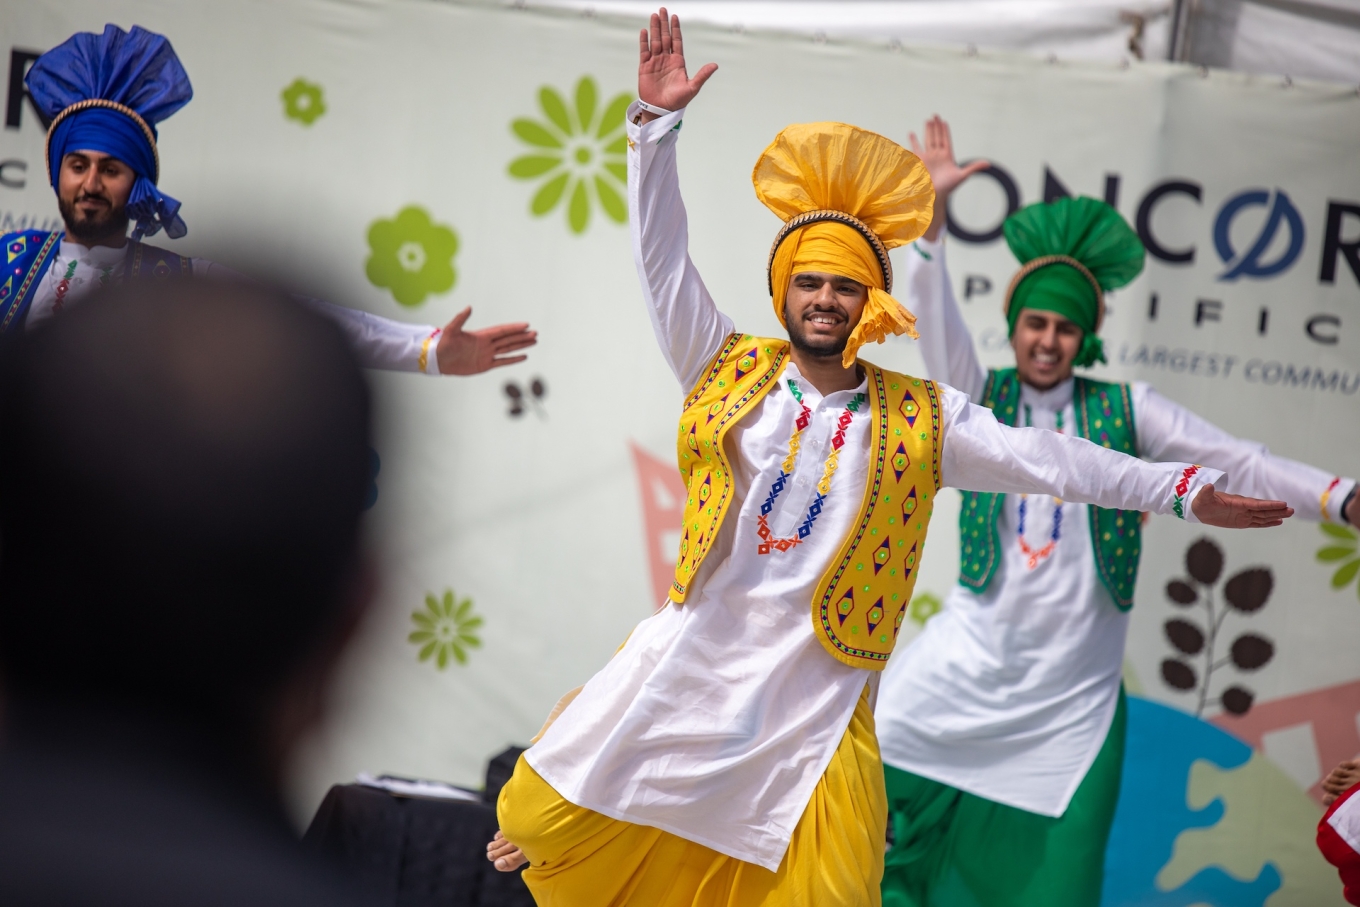 Bangra dancers in bright costumes perform on stage